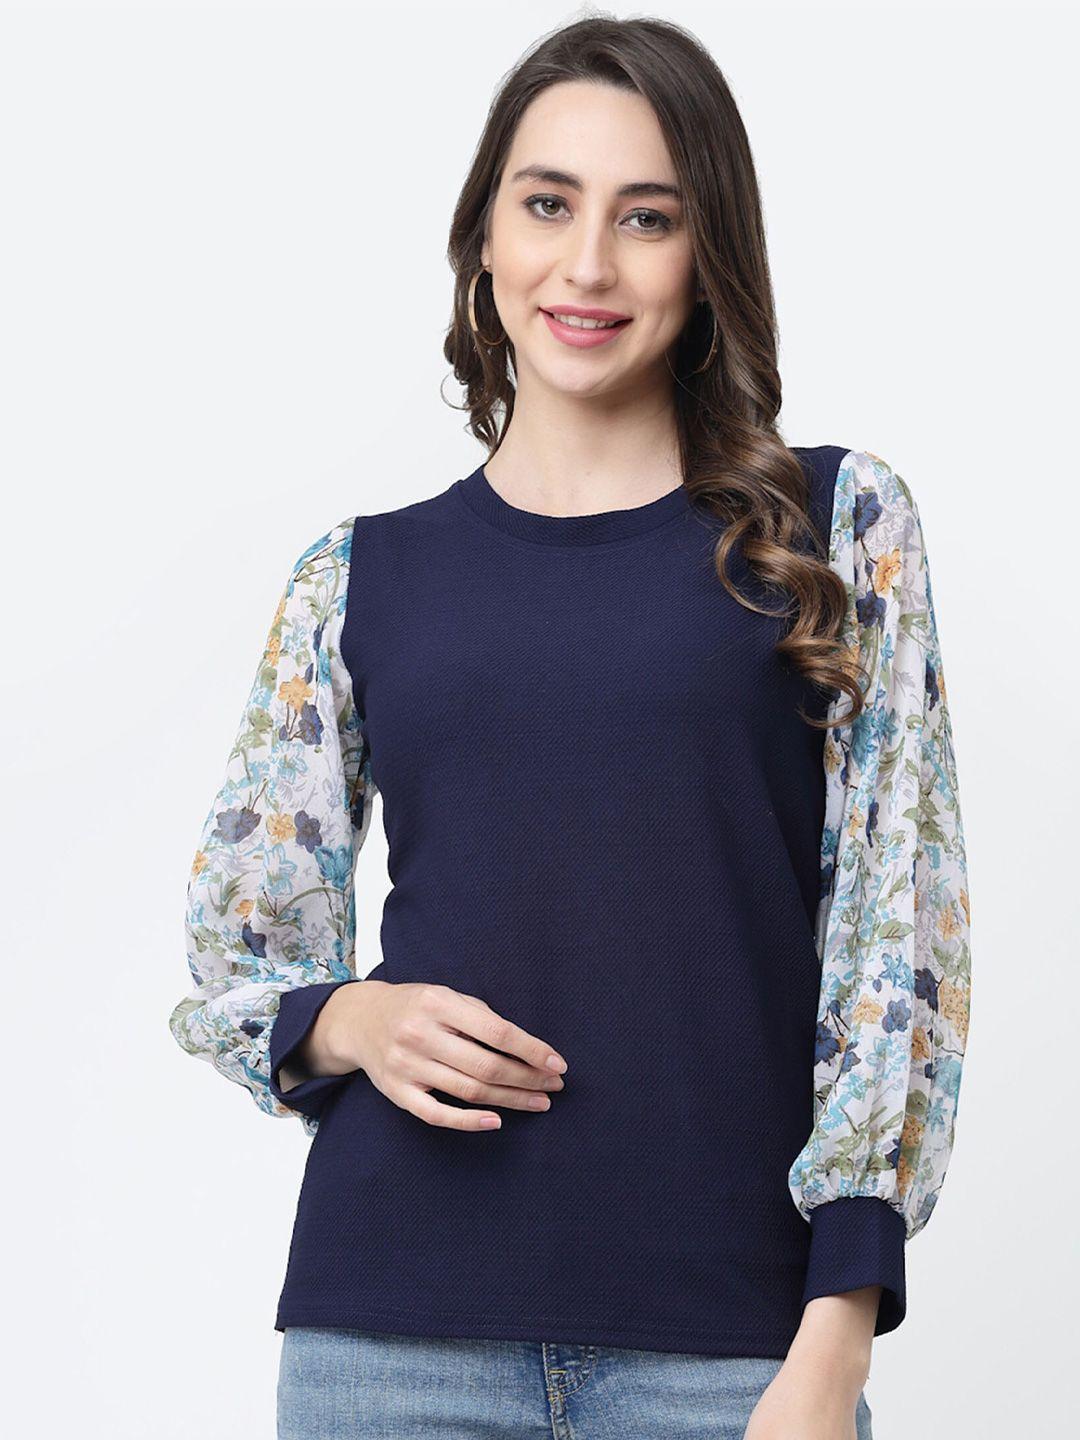 miss ayse floral print styled back top